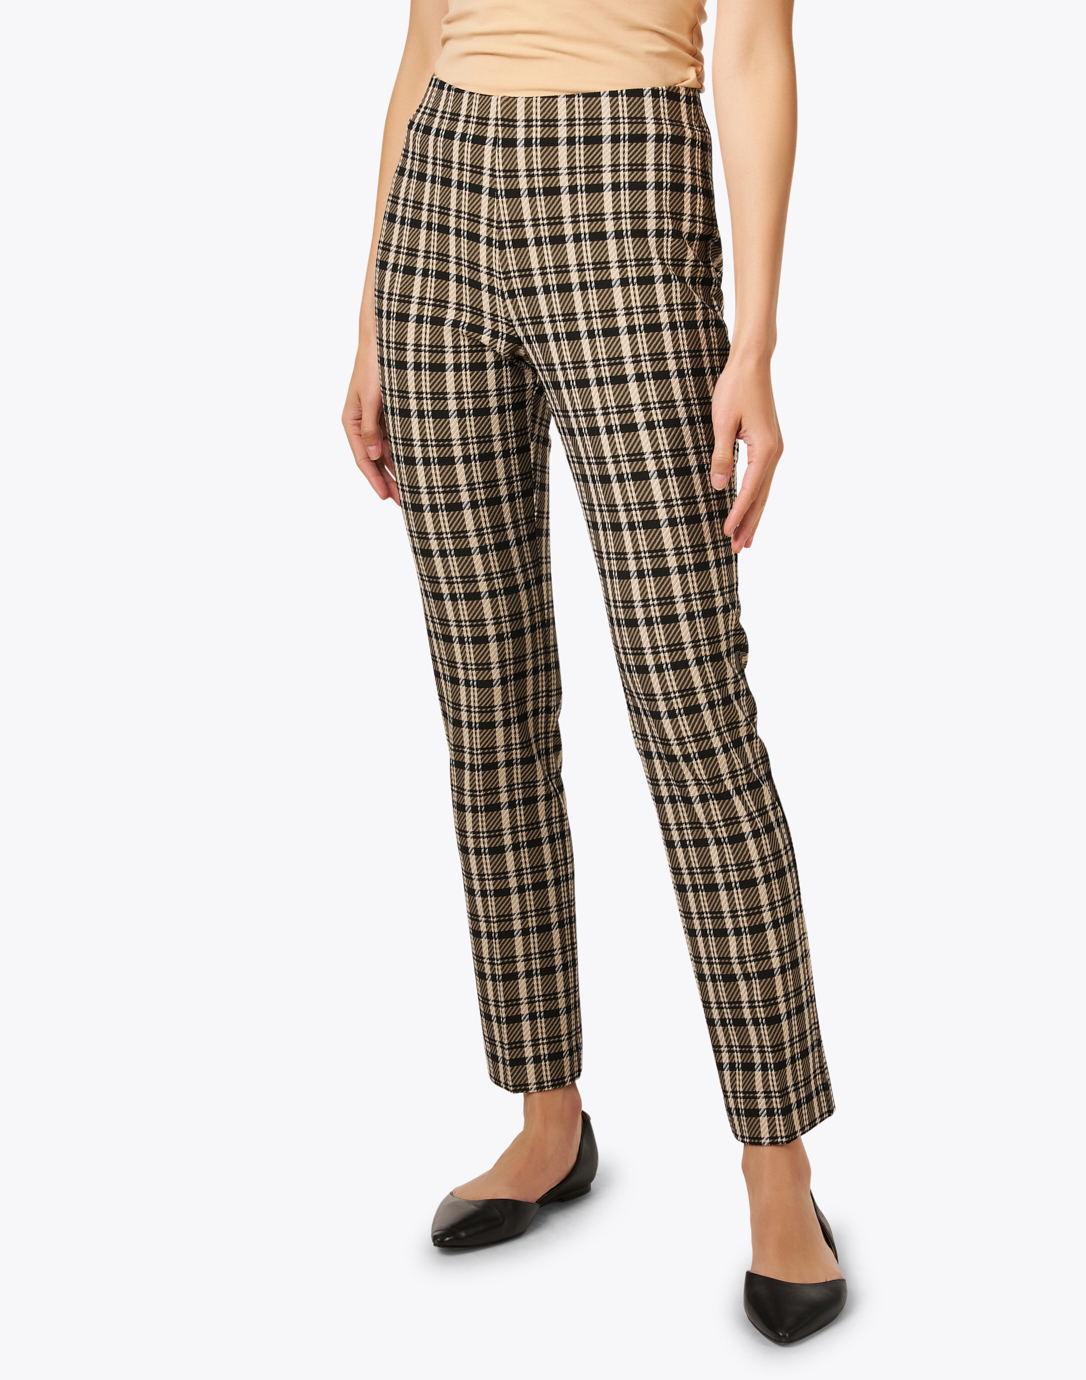 34 Versatile Plaid Pants And Ways Of Pulling Them Off